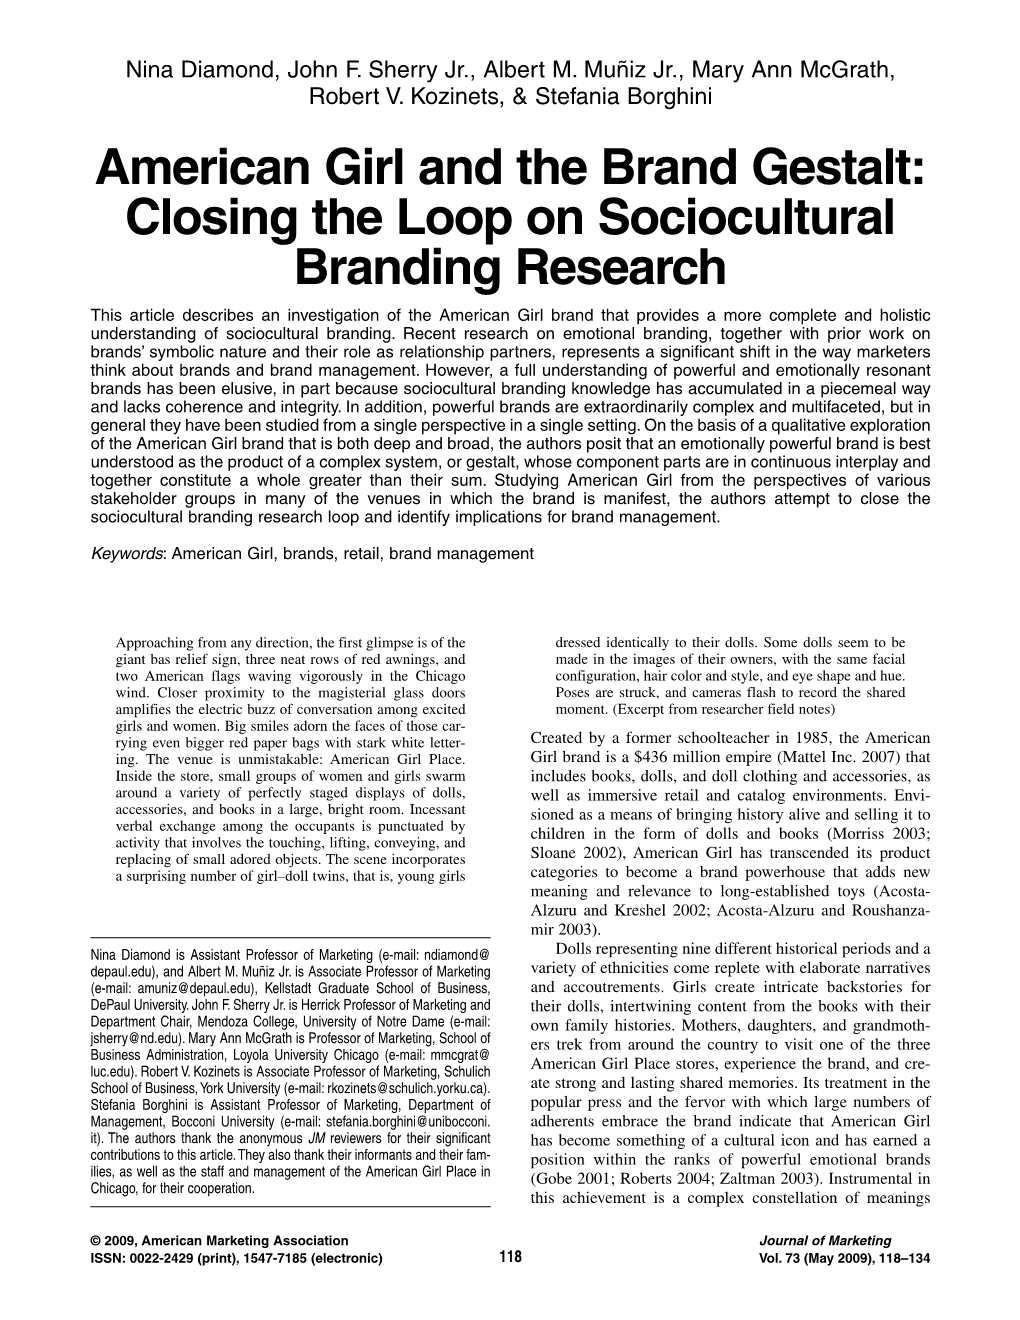 American Girl and the Brand Gestalt: Closing the Loop on Sociocultural